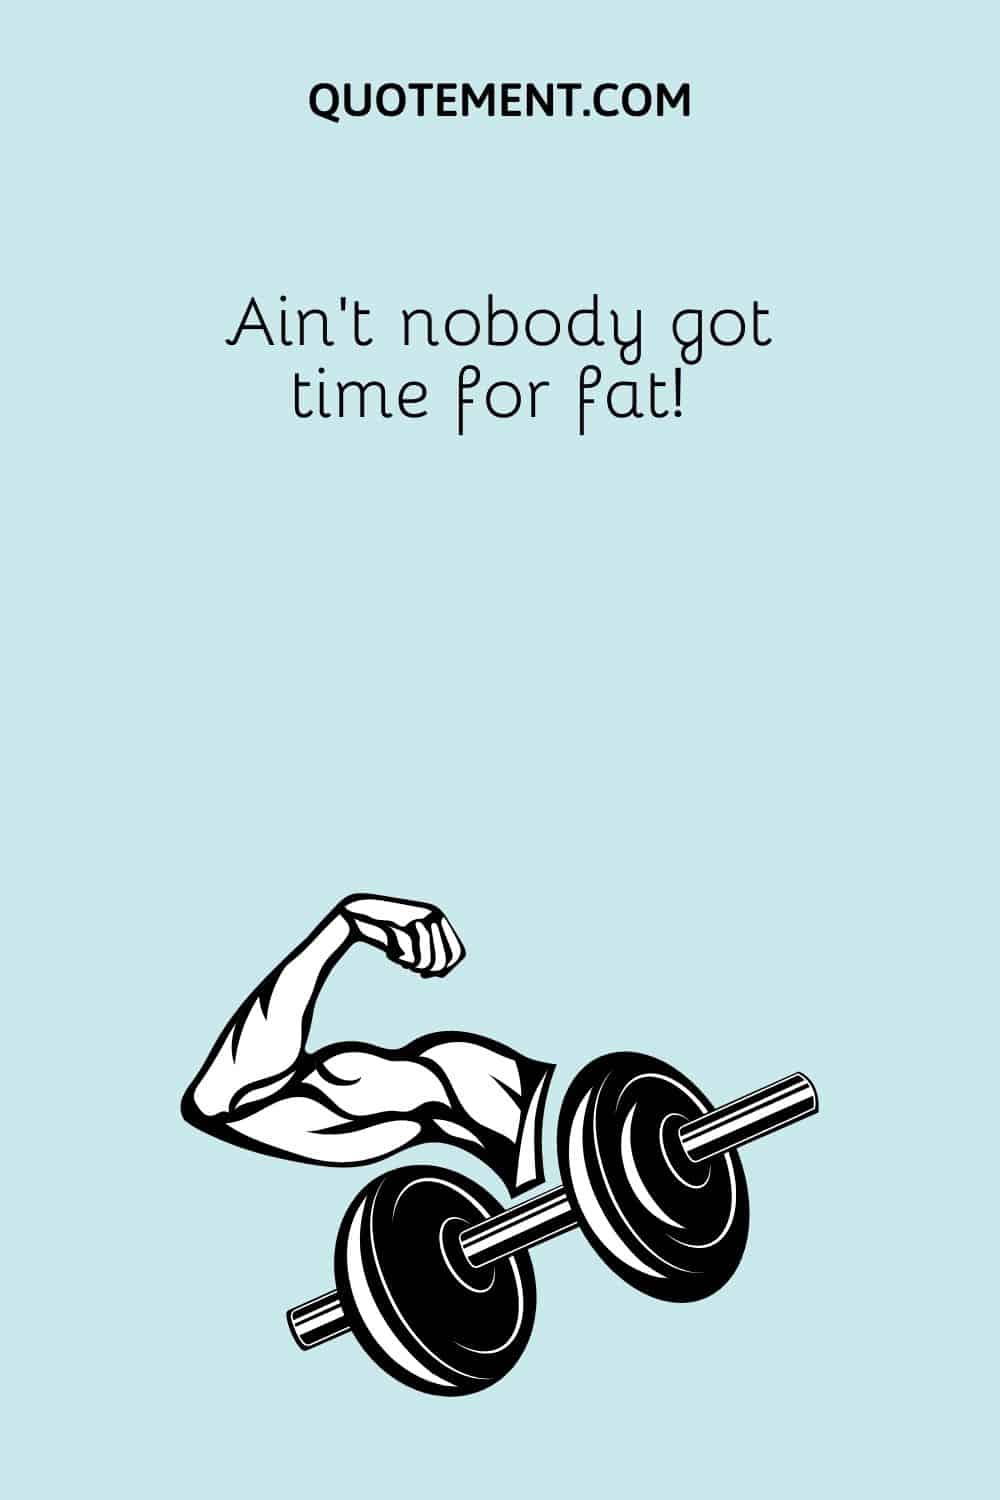 Ain’t nobody got time for fat!